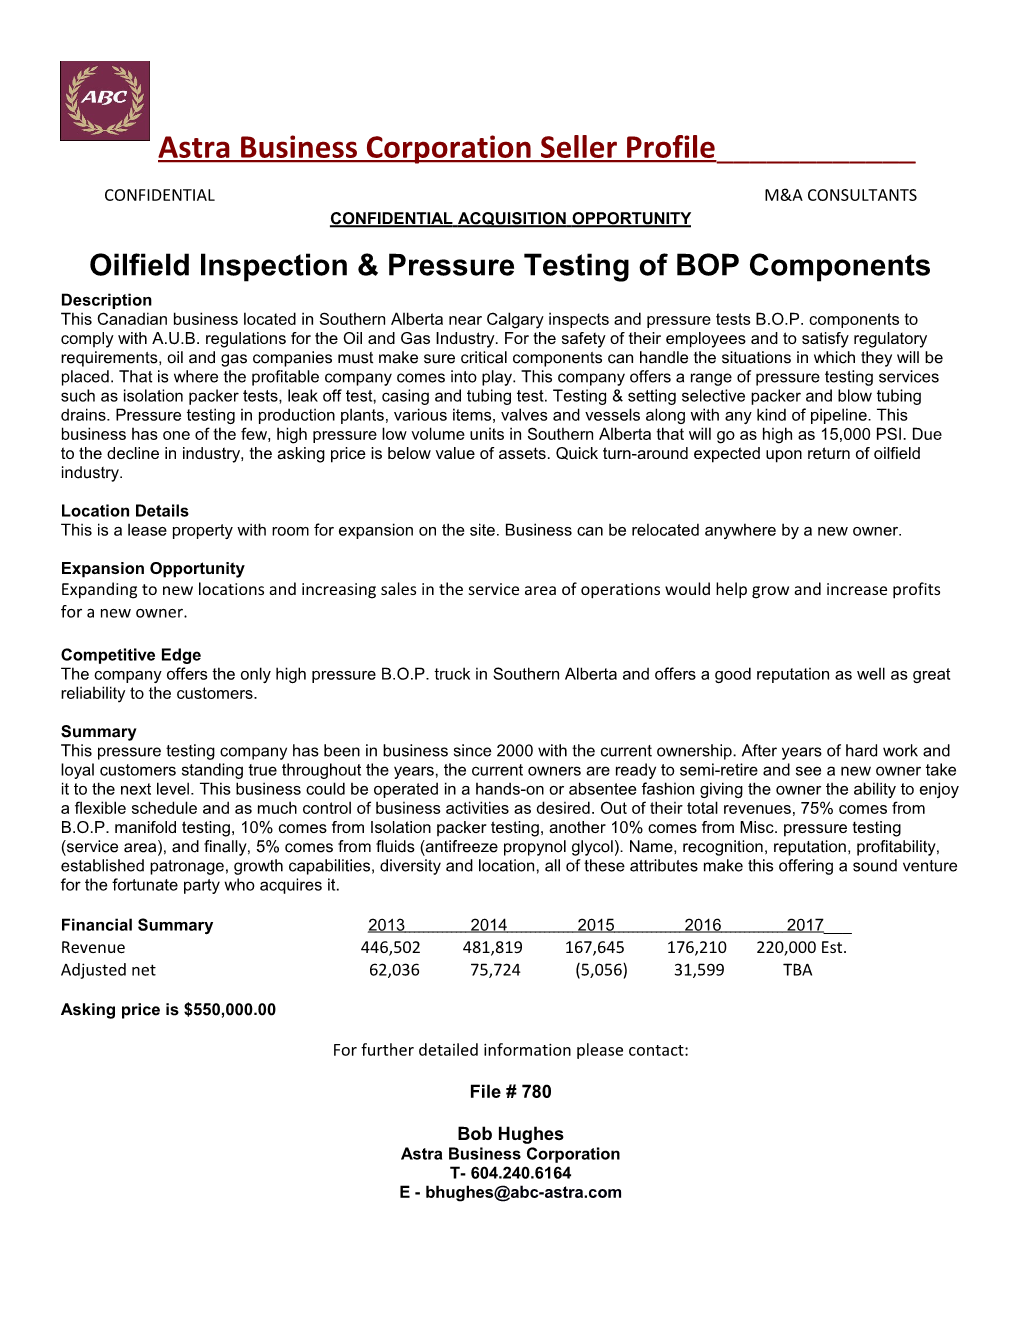 Oilfield Inspection & Pressure Testing of BOP Components